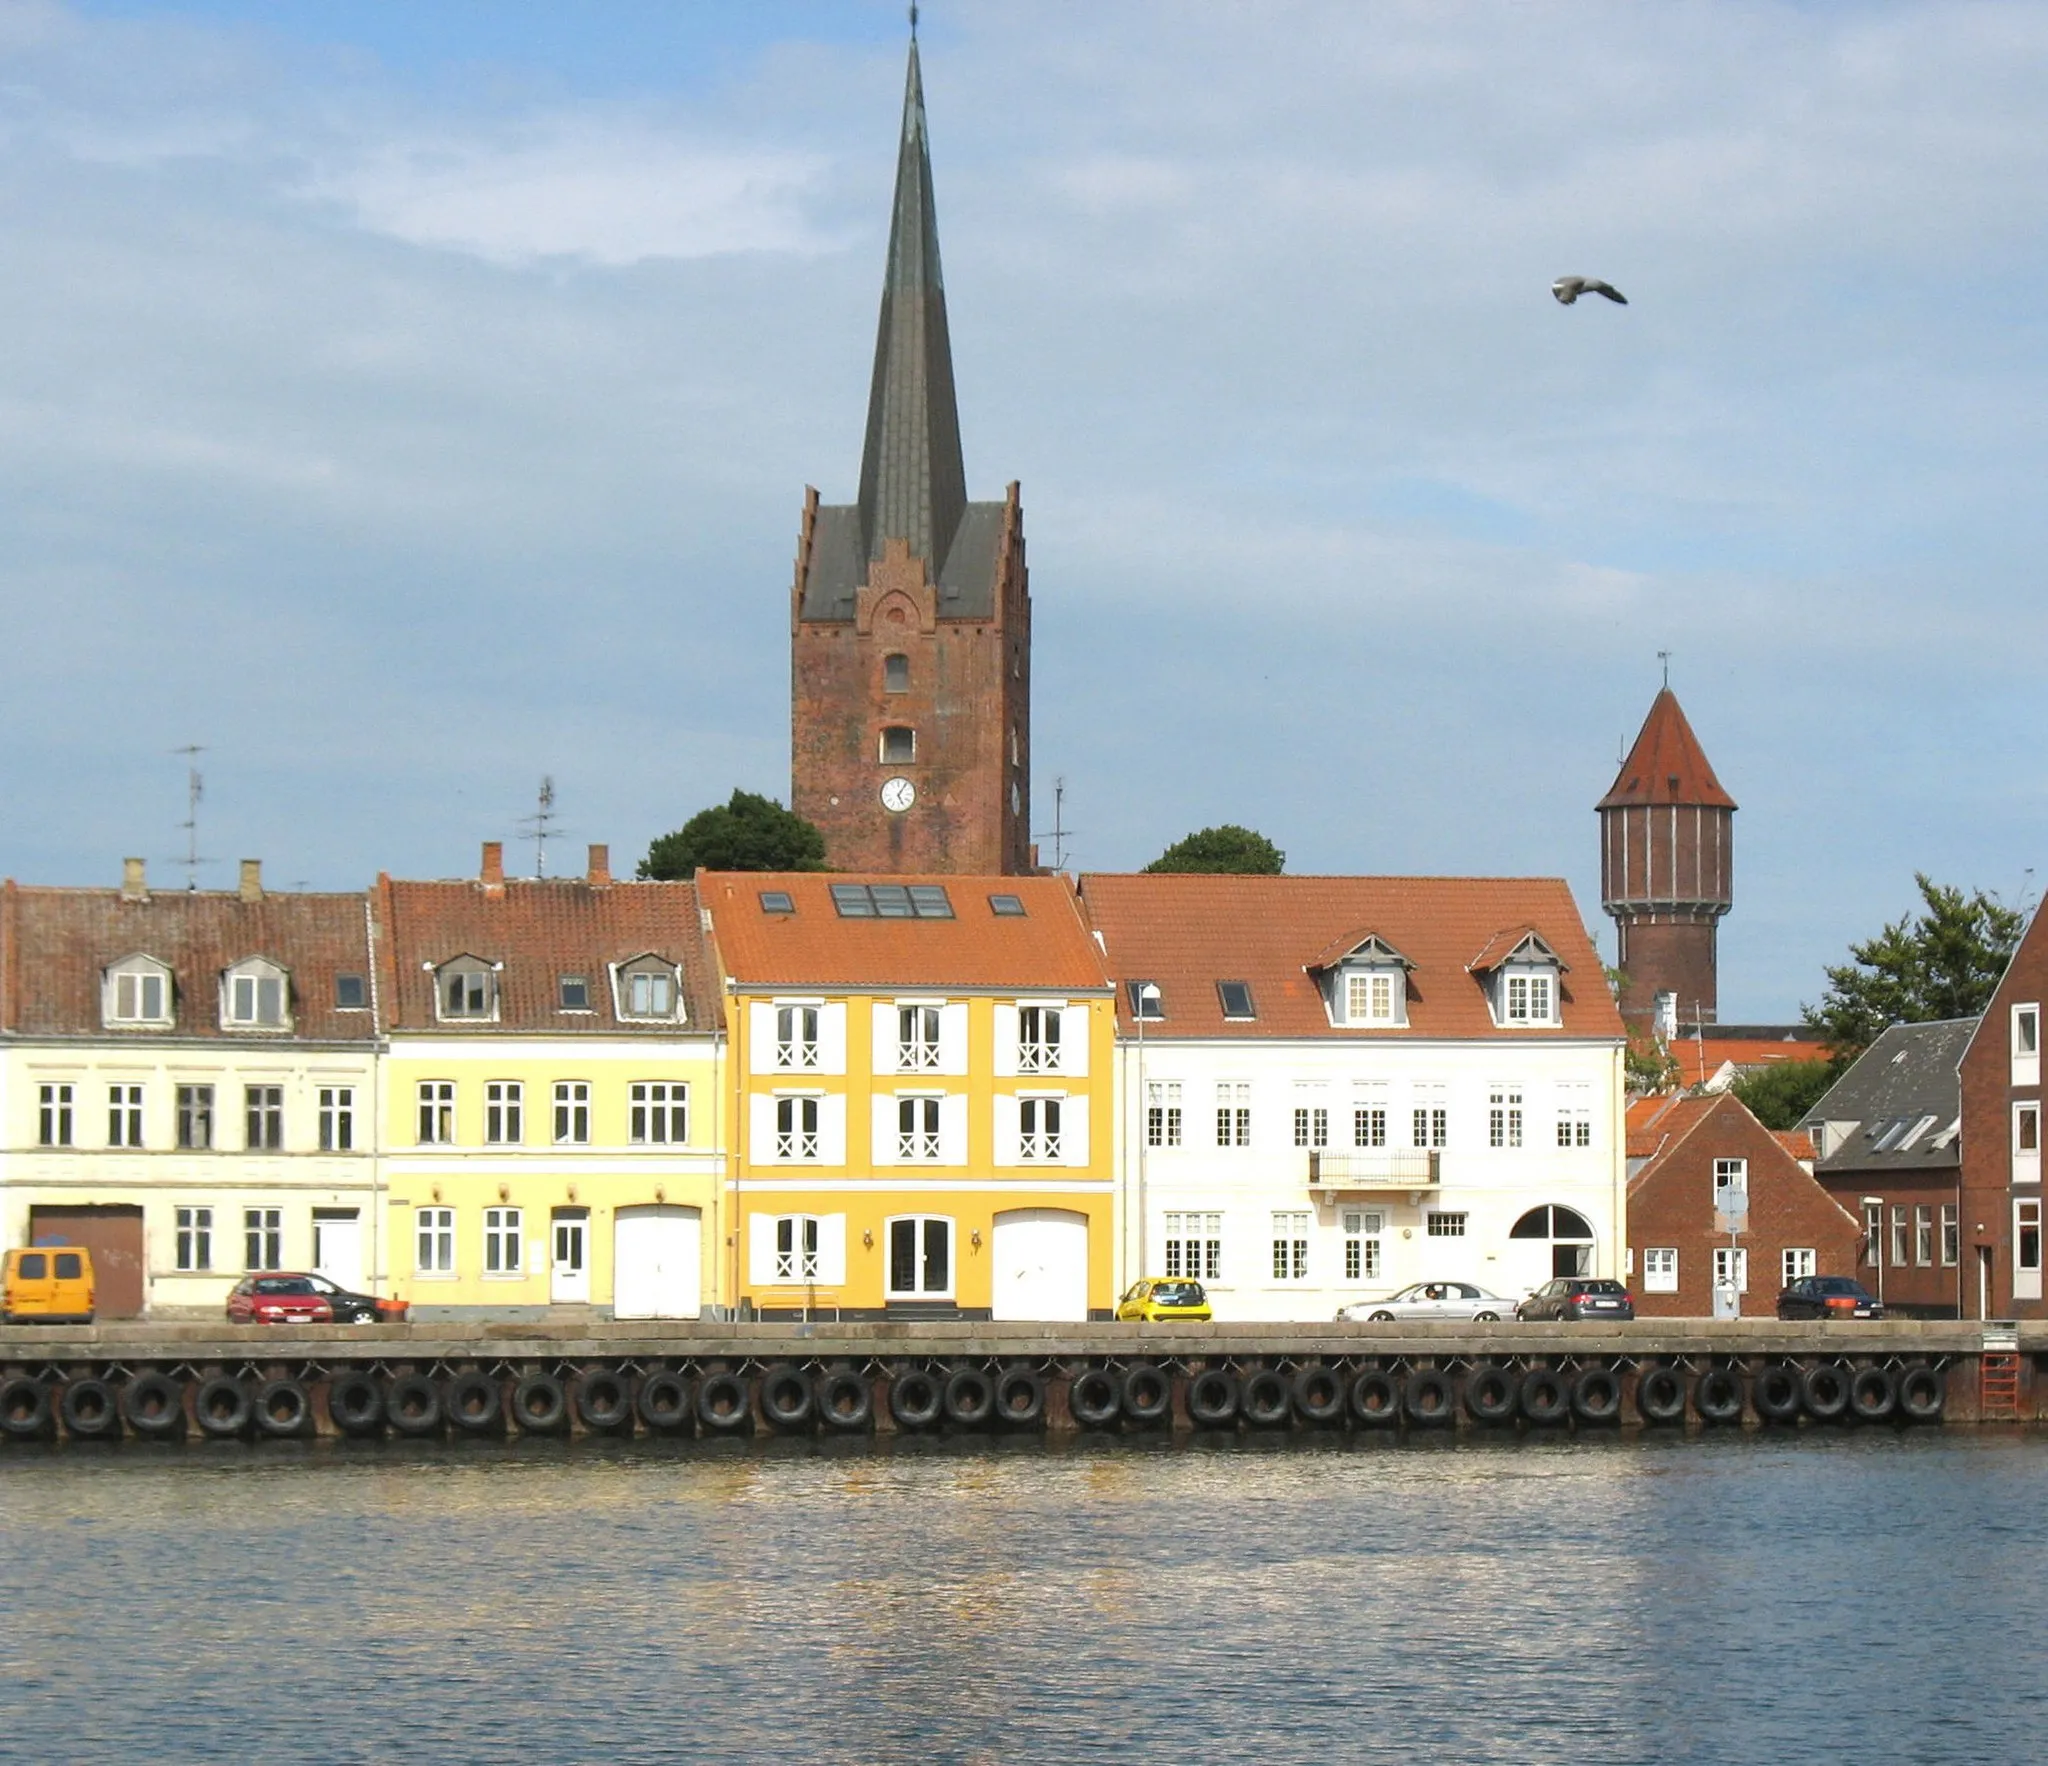 Photo showing: View from the habour at the town "Nakskov" located on the island Lolland in east Denmark.